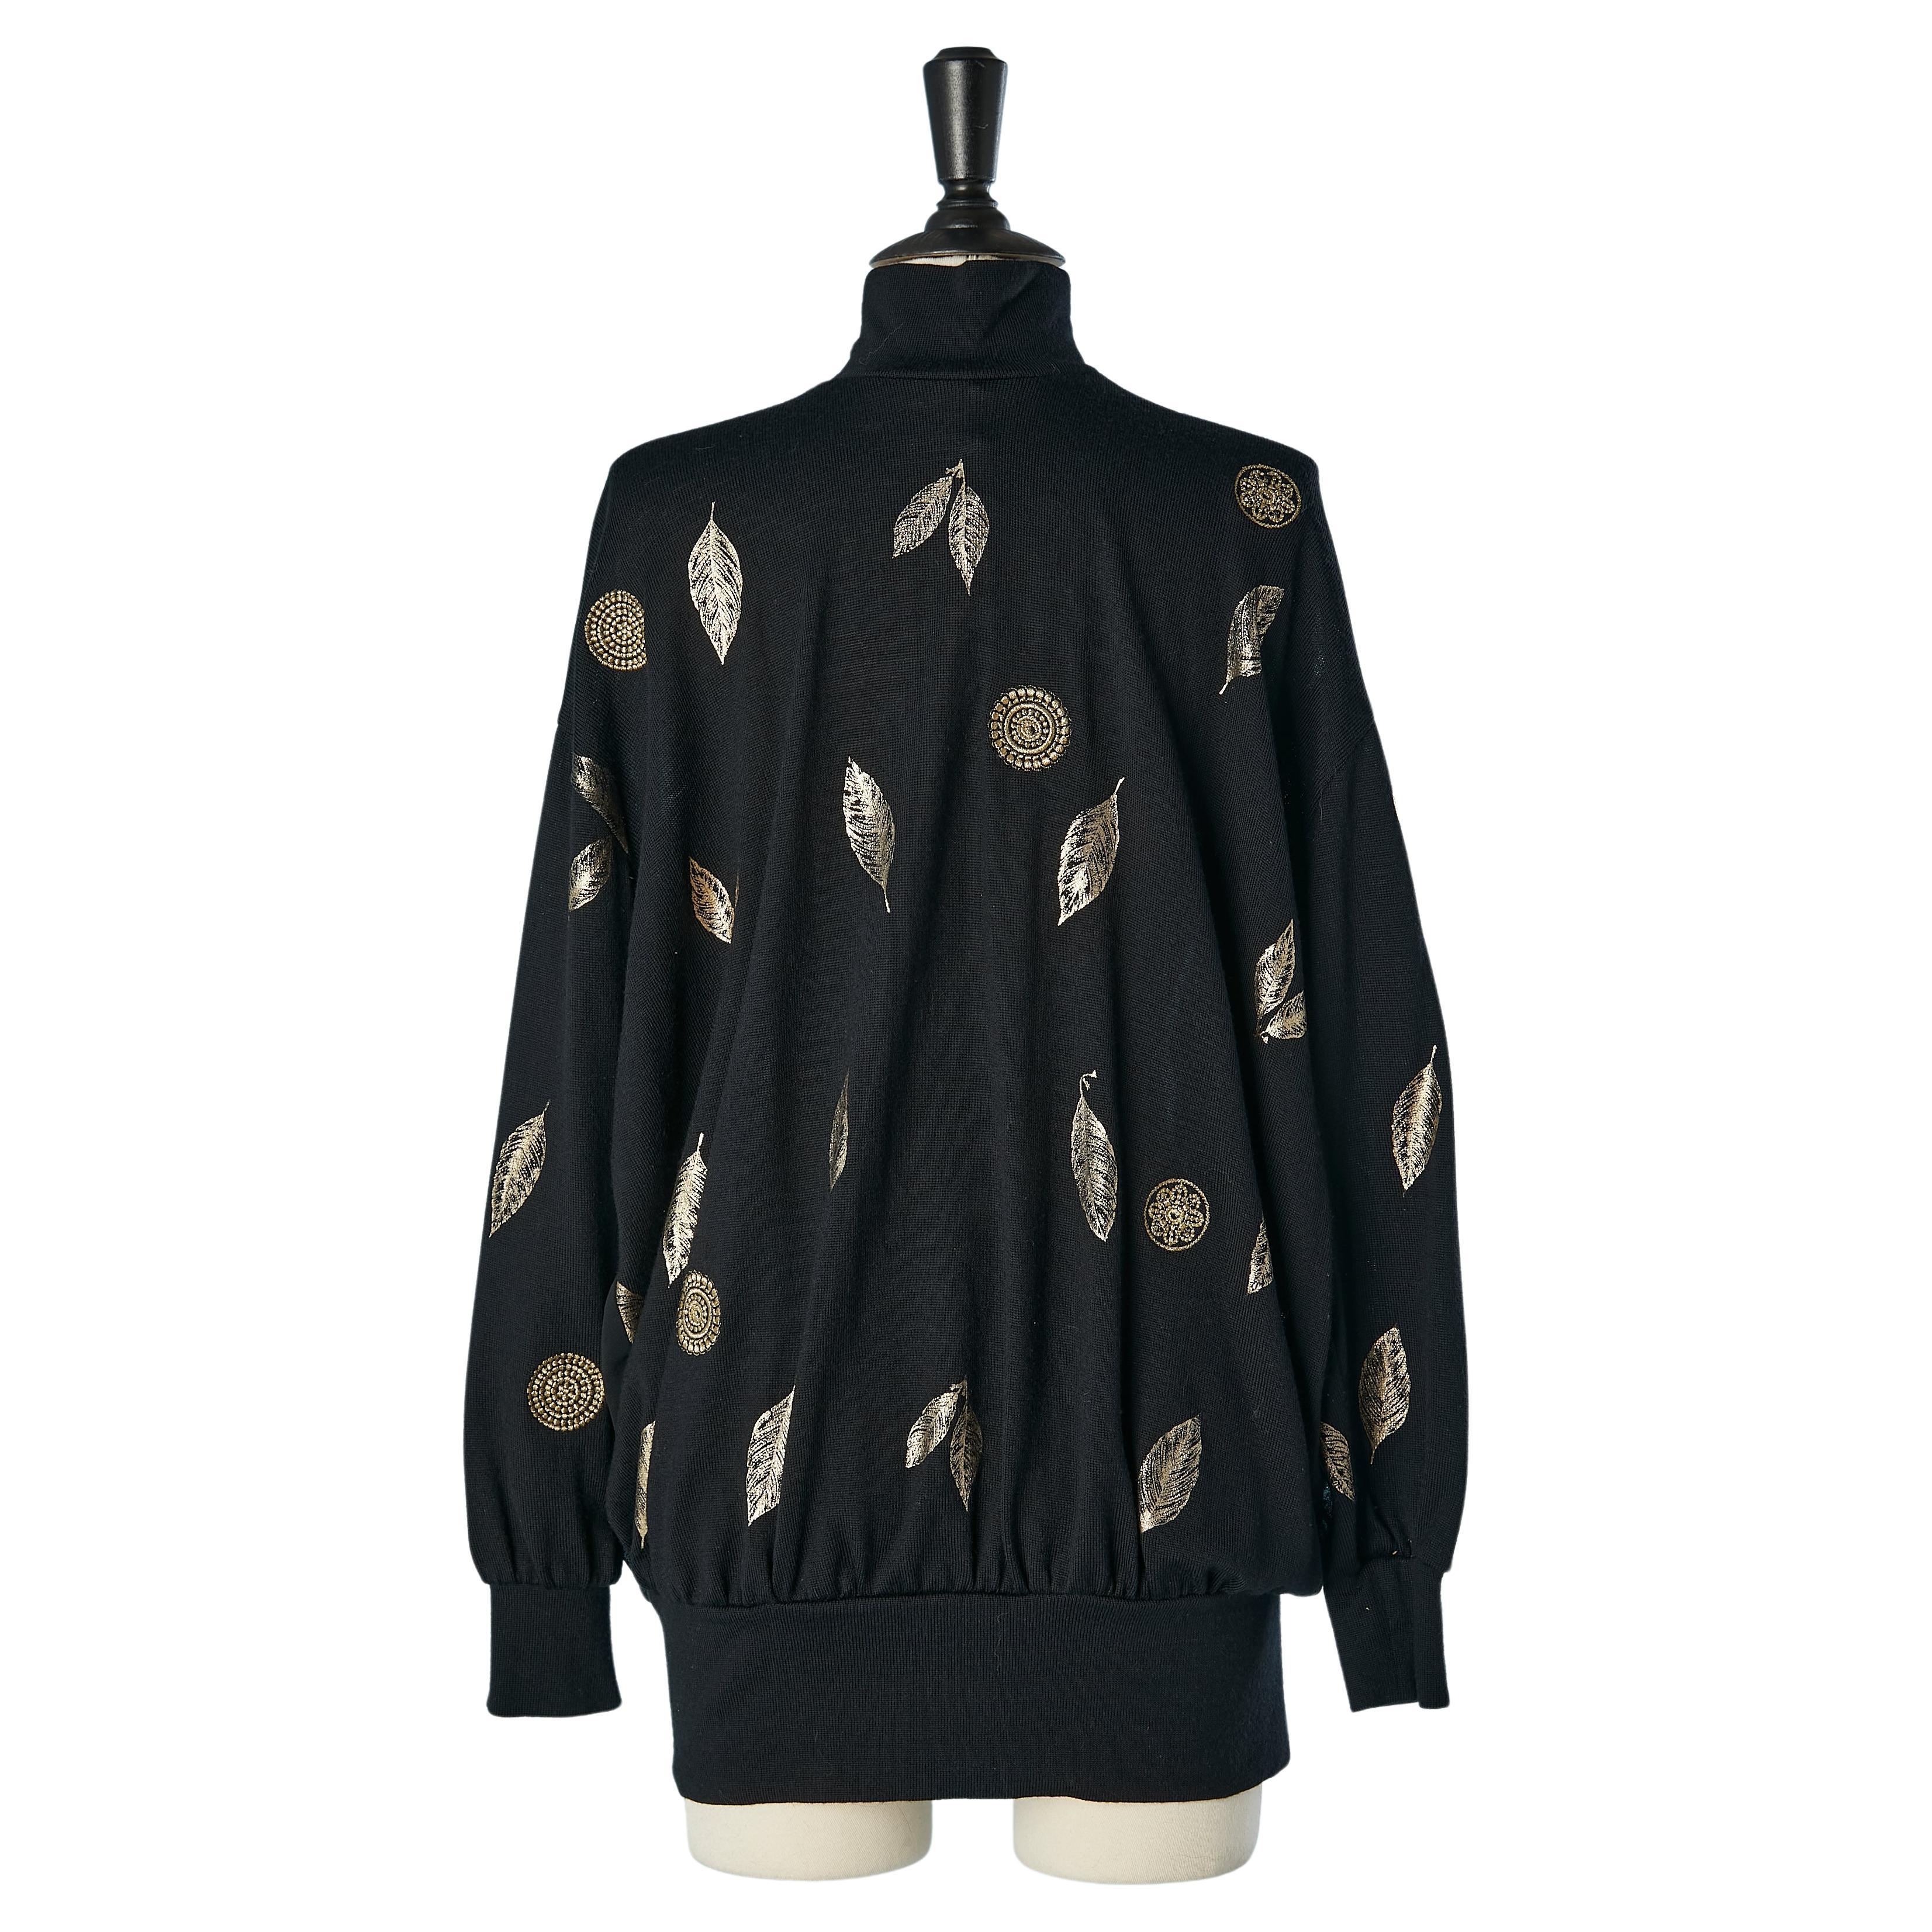 Black sweater with gold details embellishment and see-through back G. Ferré  For Sale